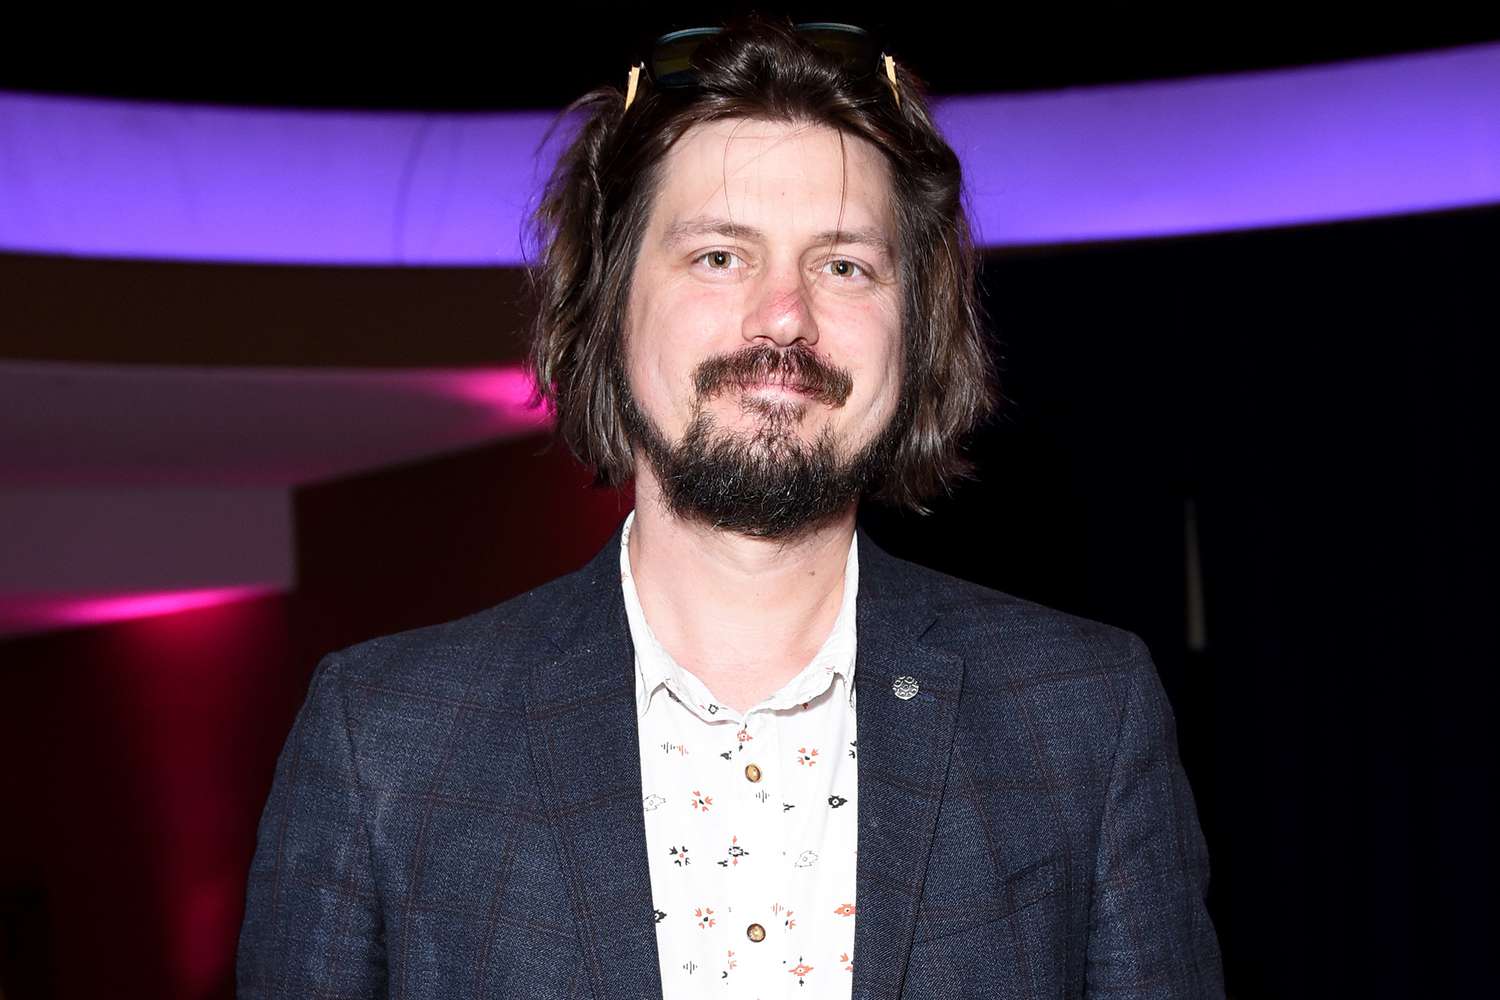 Trevor Moore attends the Comedy Central Roast of Bruce Willis at Hollywood Palladium on July 14, 2018 in Los Angeles, California.